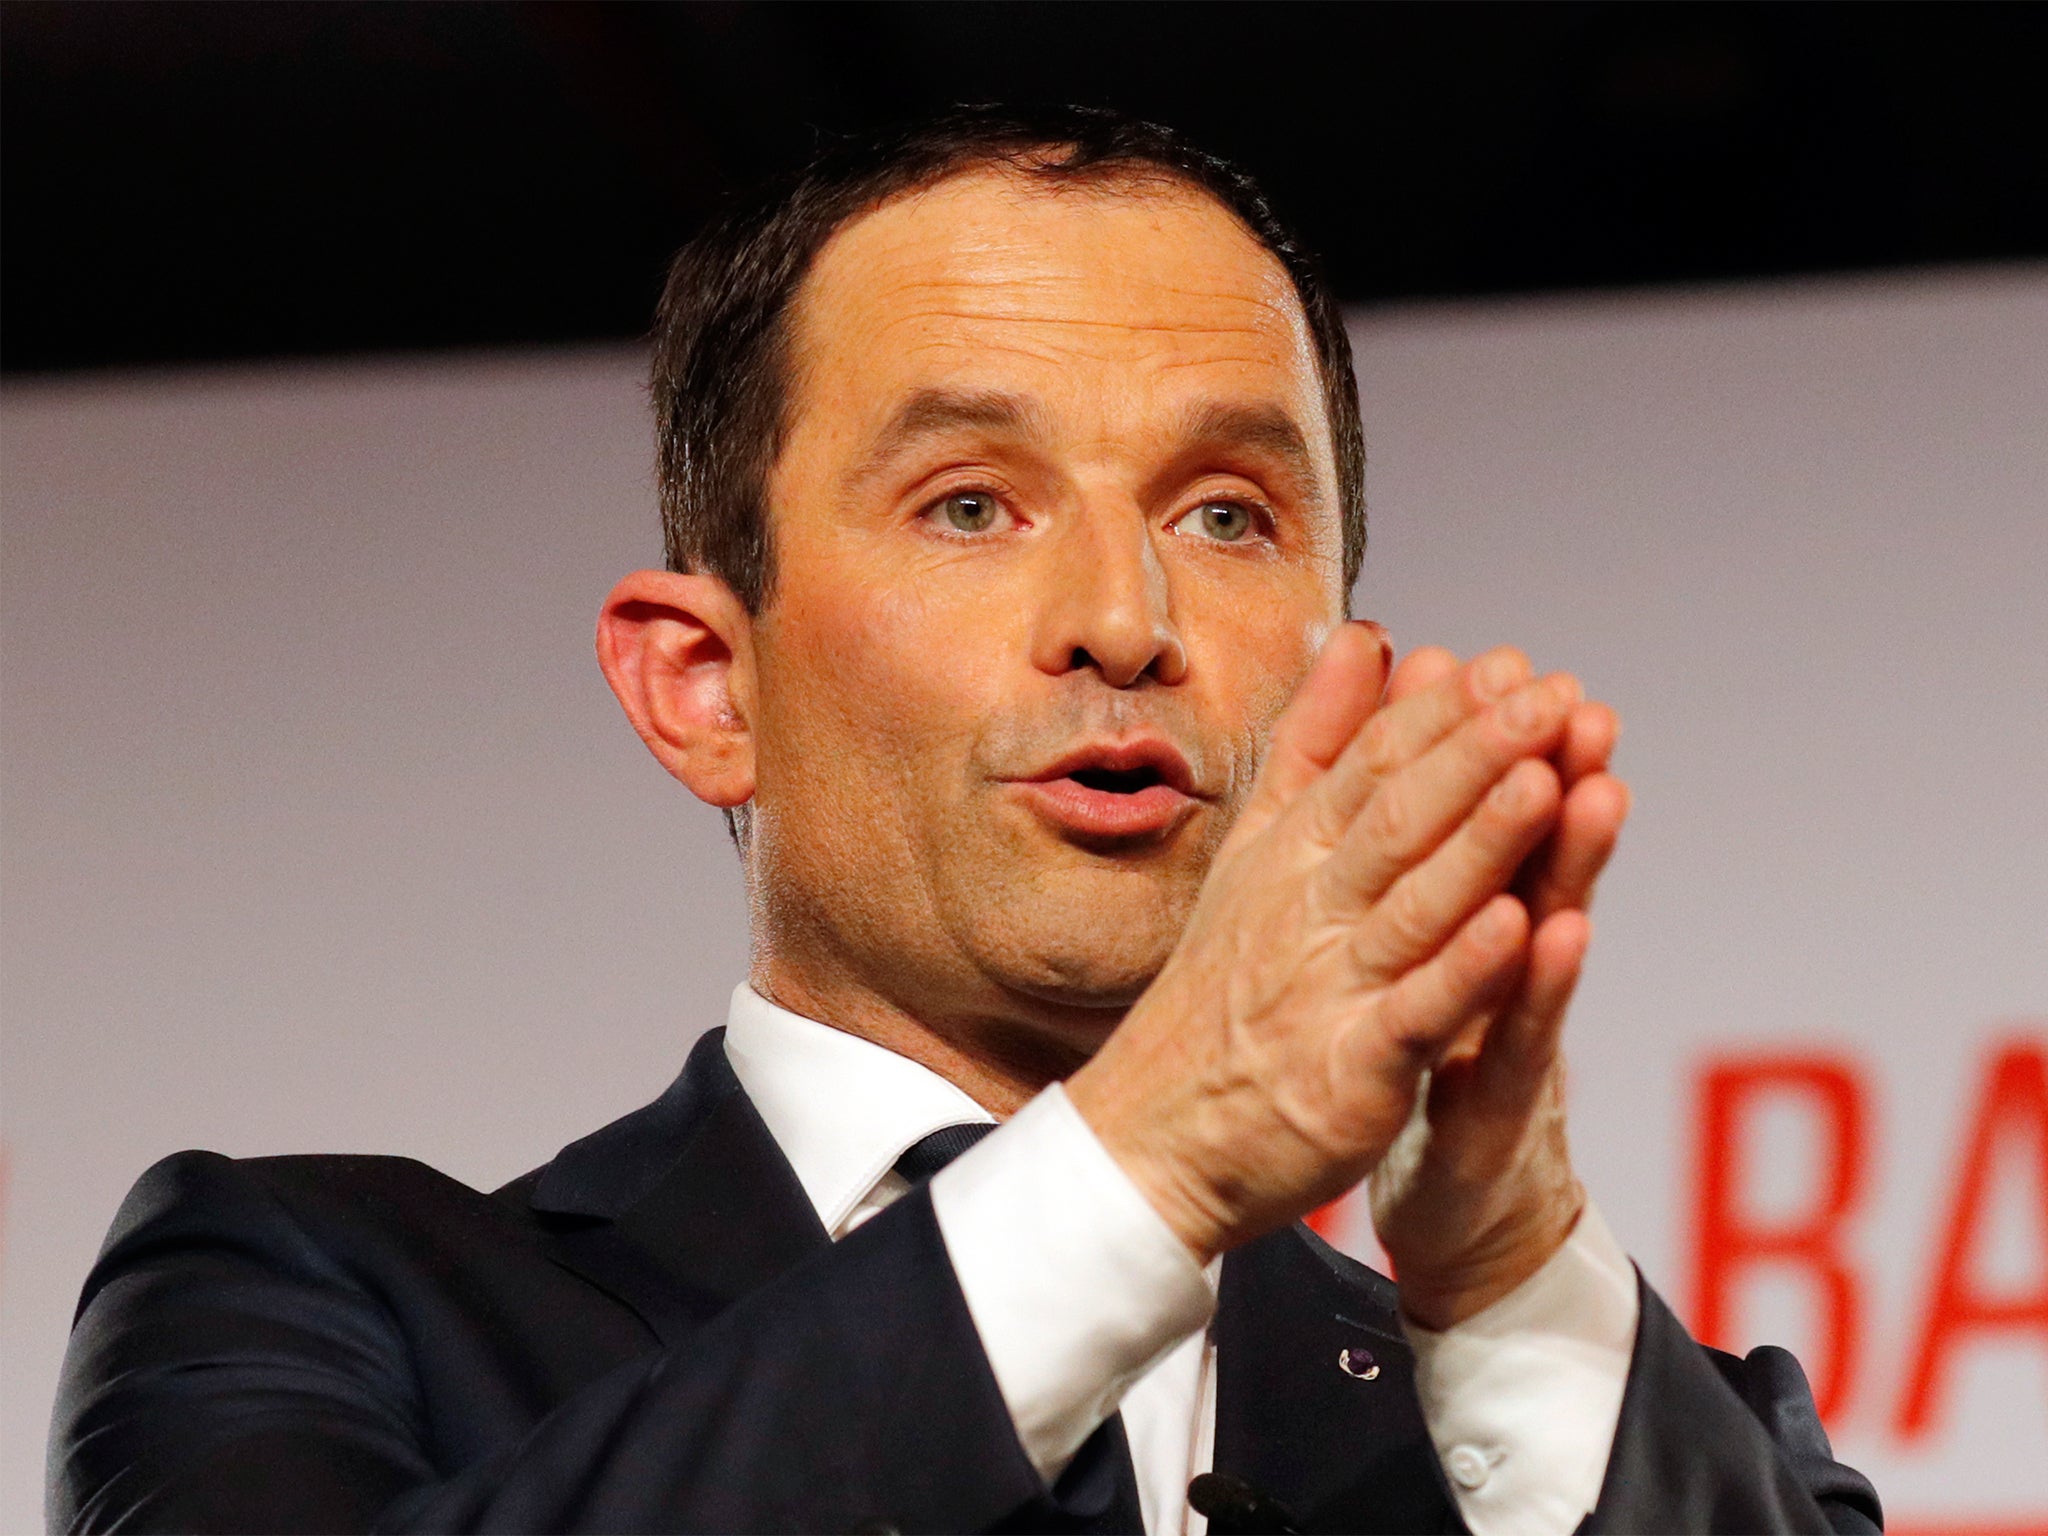 Benoit Hamon is the favourite in the French socialist party's primaries for the presidential race